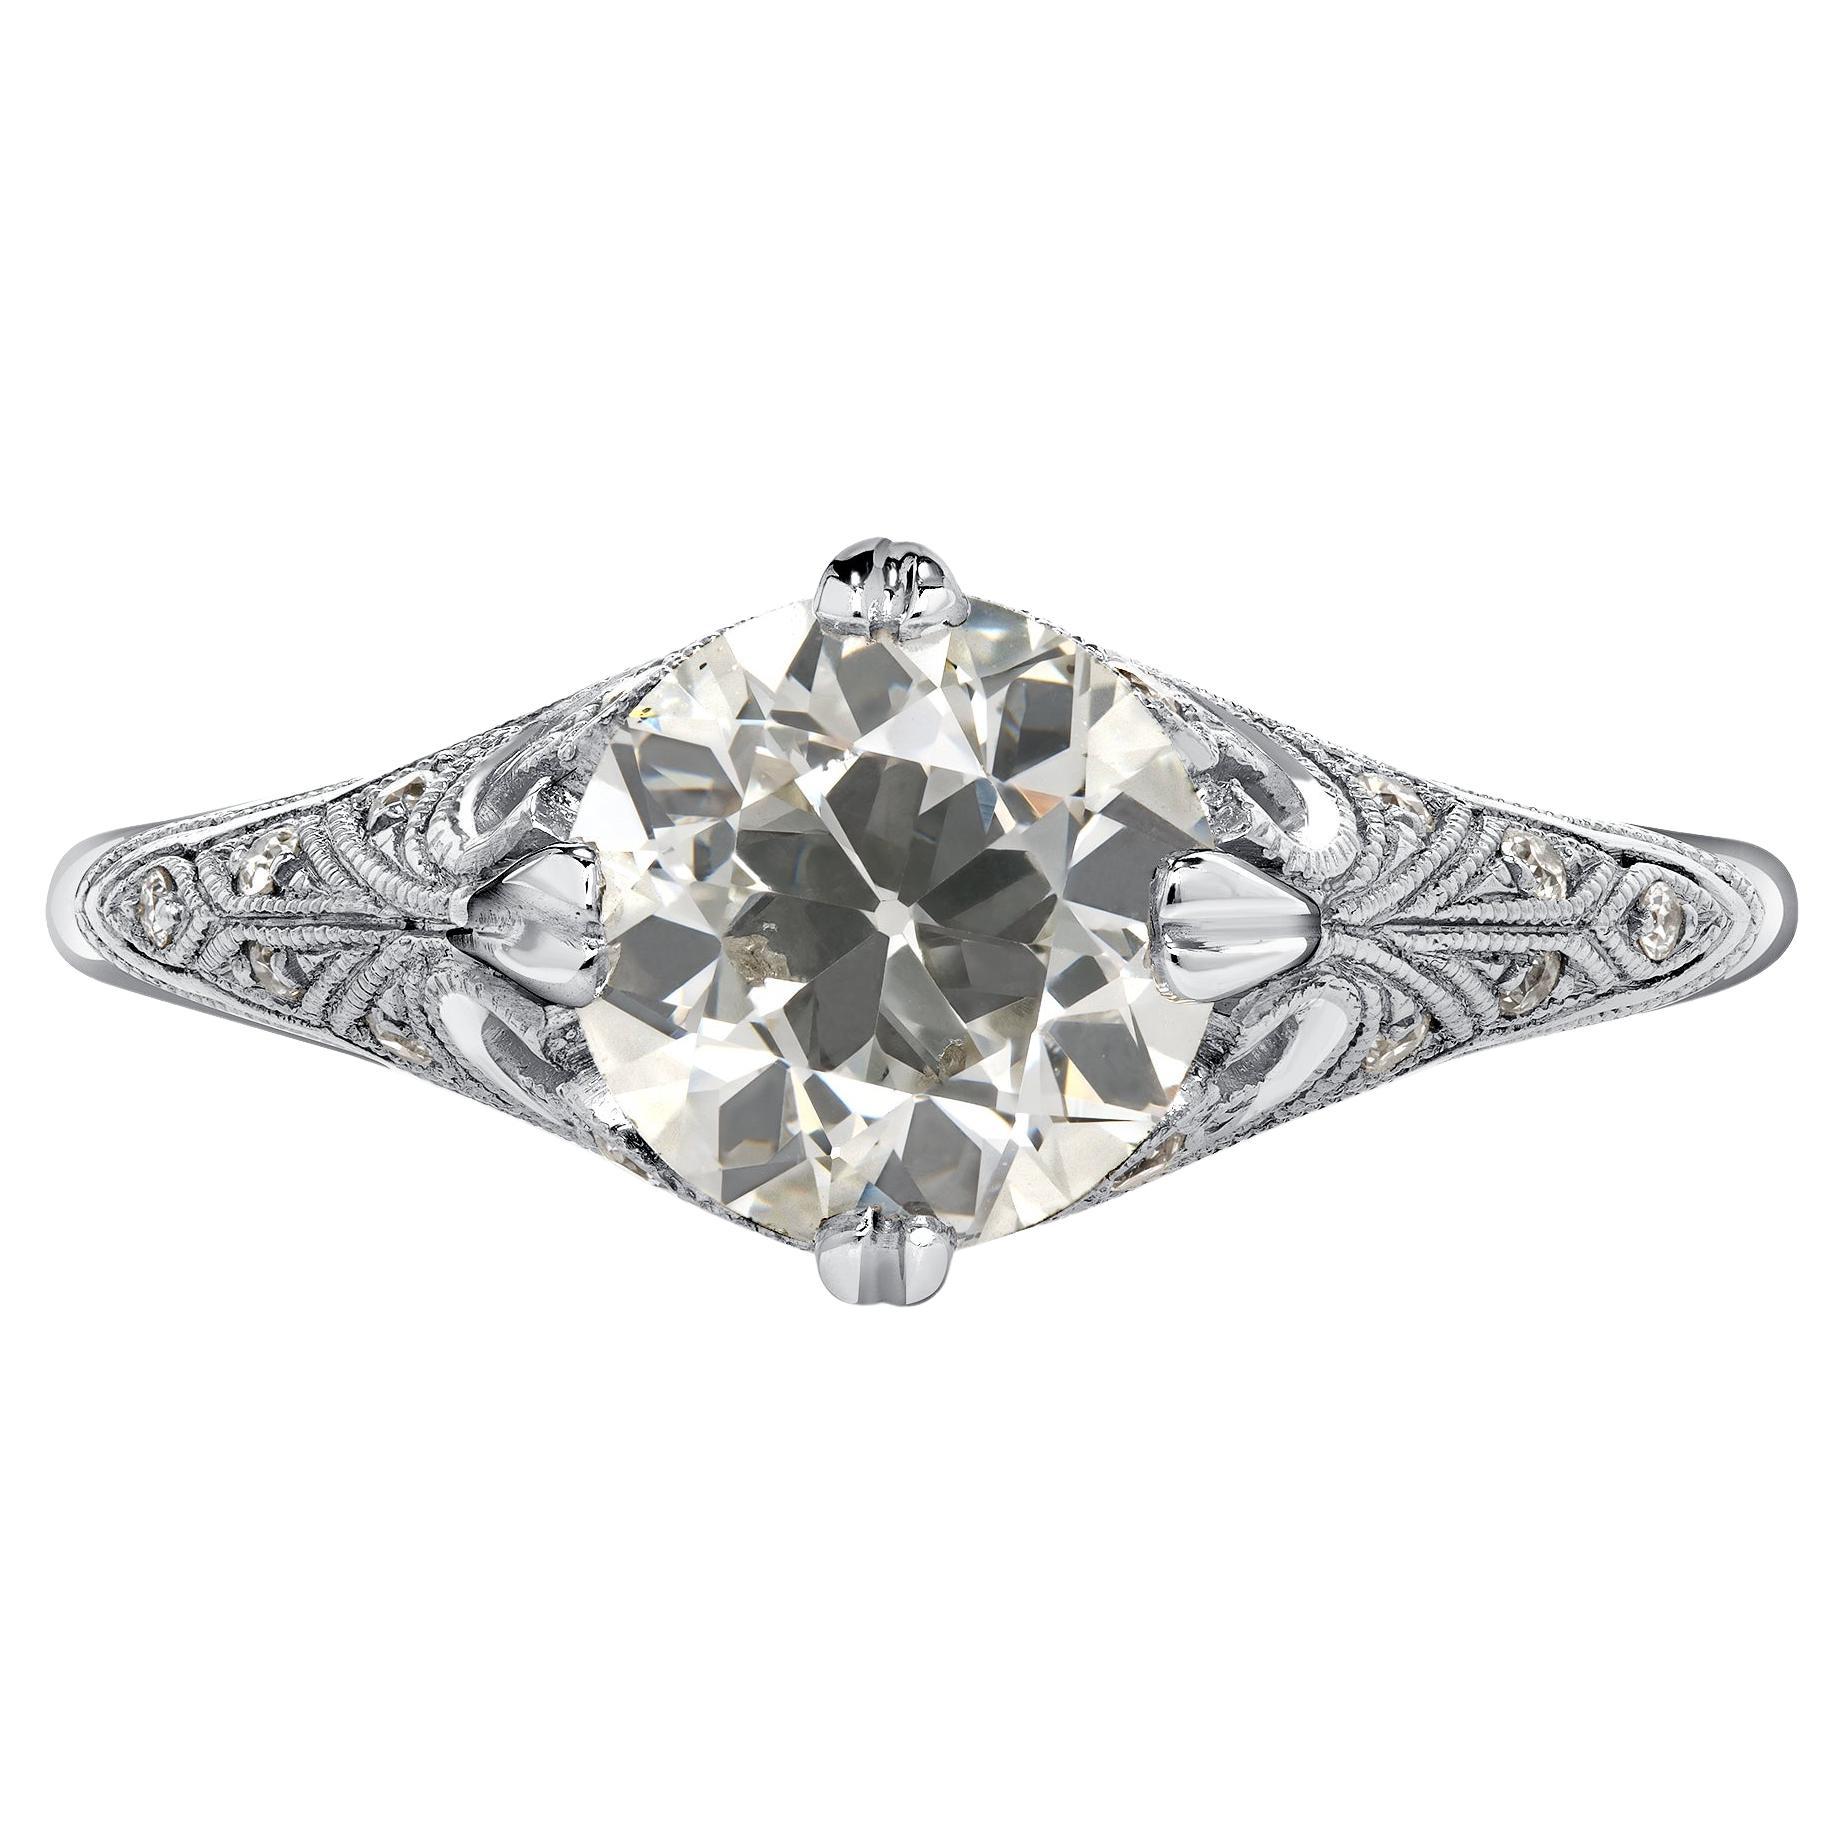 Handcrafted Itzela Old European Cut Diamond Ring by Single Stone For Sale